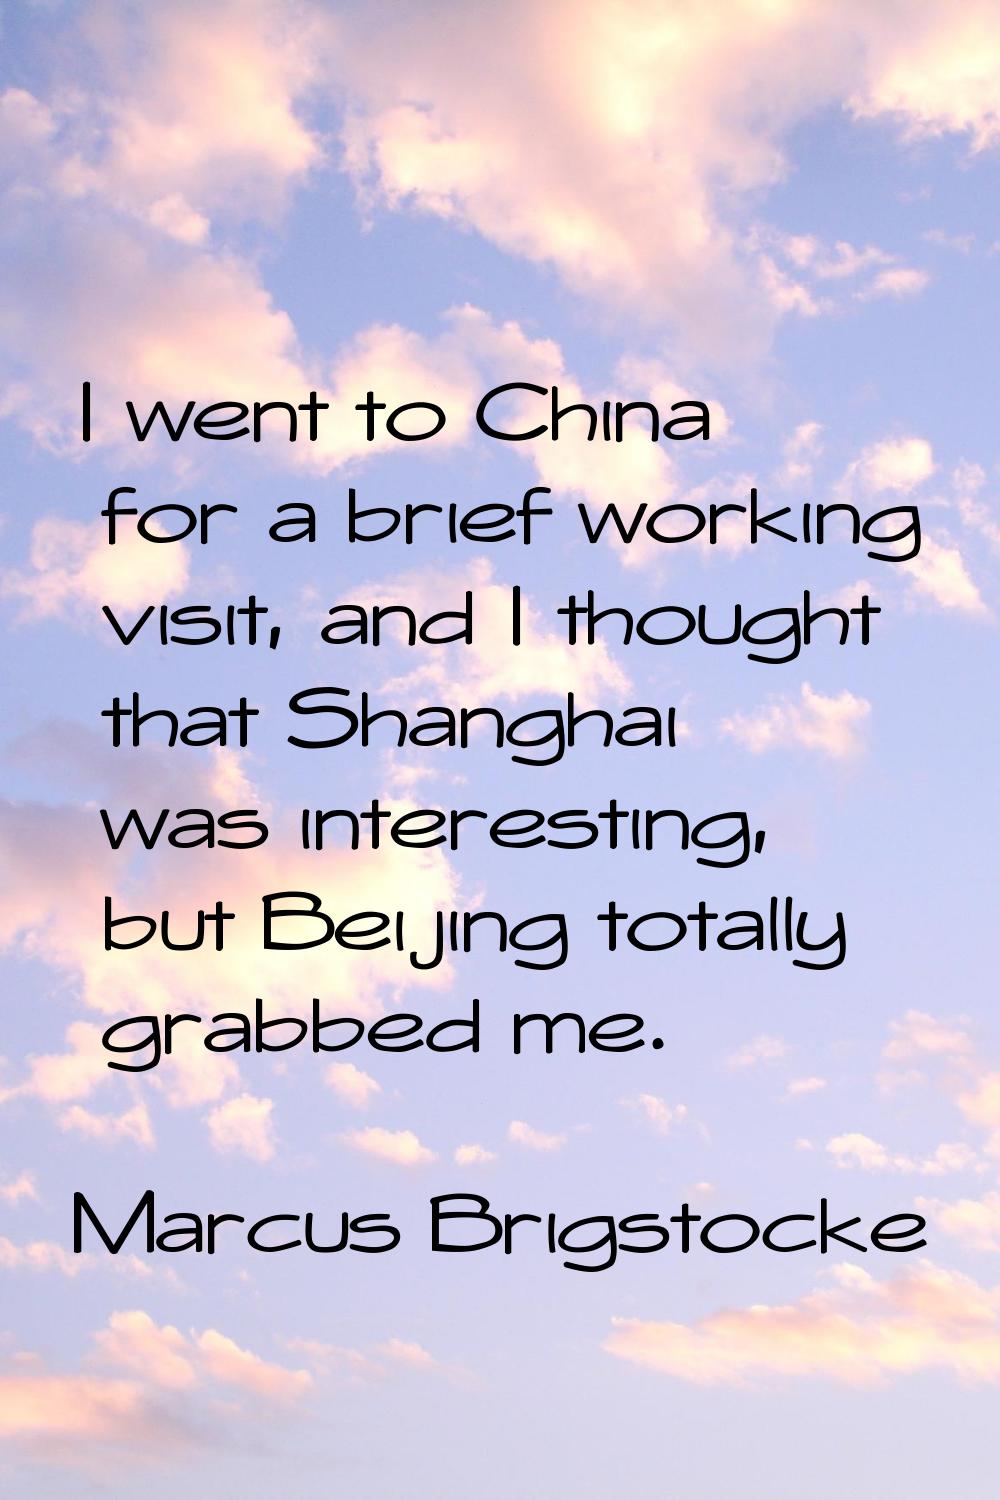 I went to China for a brief working visit, and I thought that Shanghai was interesting, but Beijing